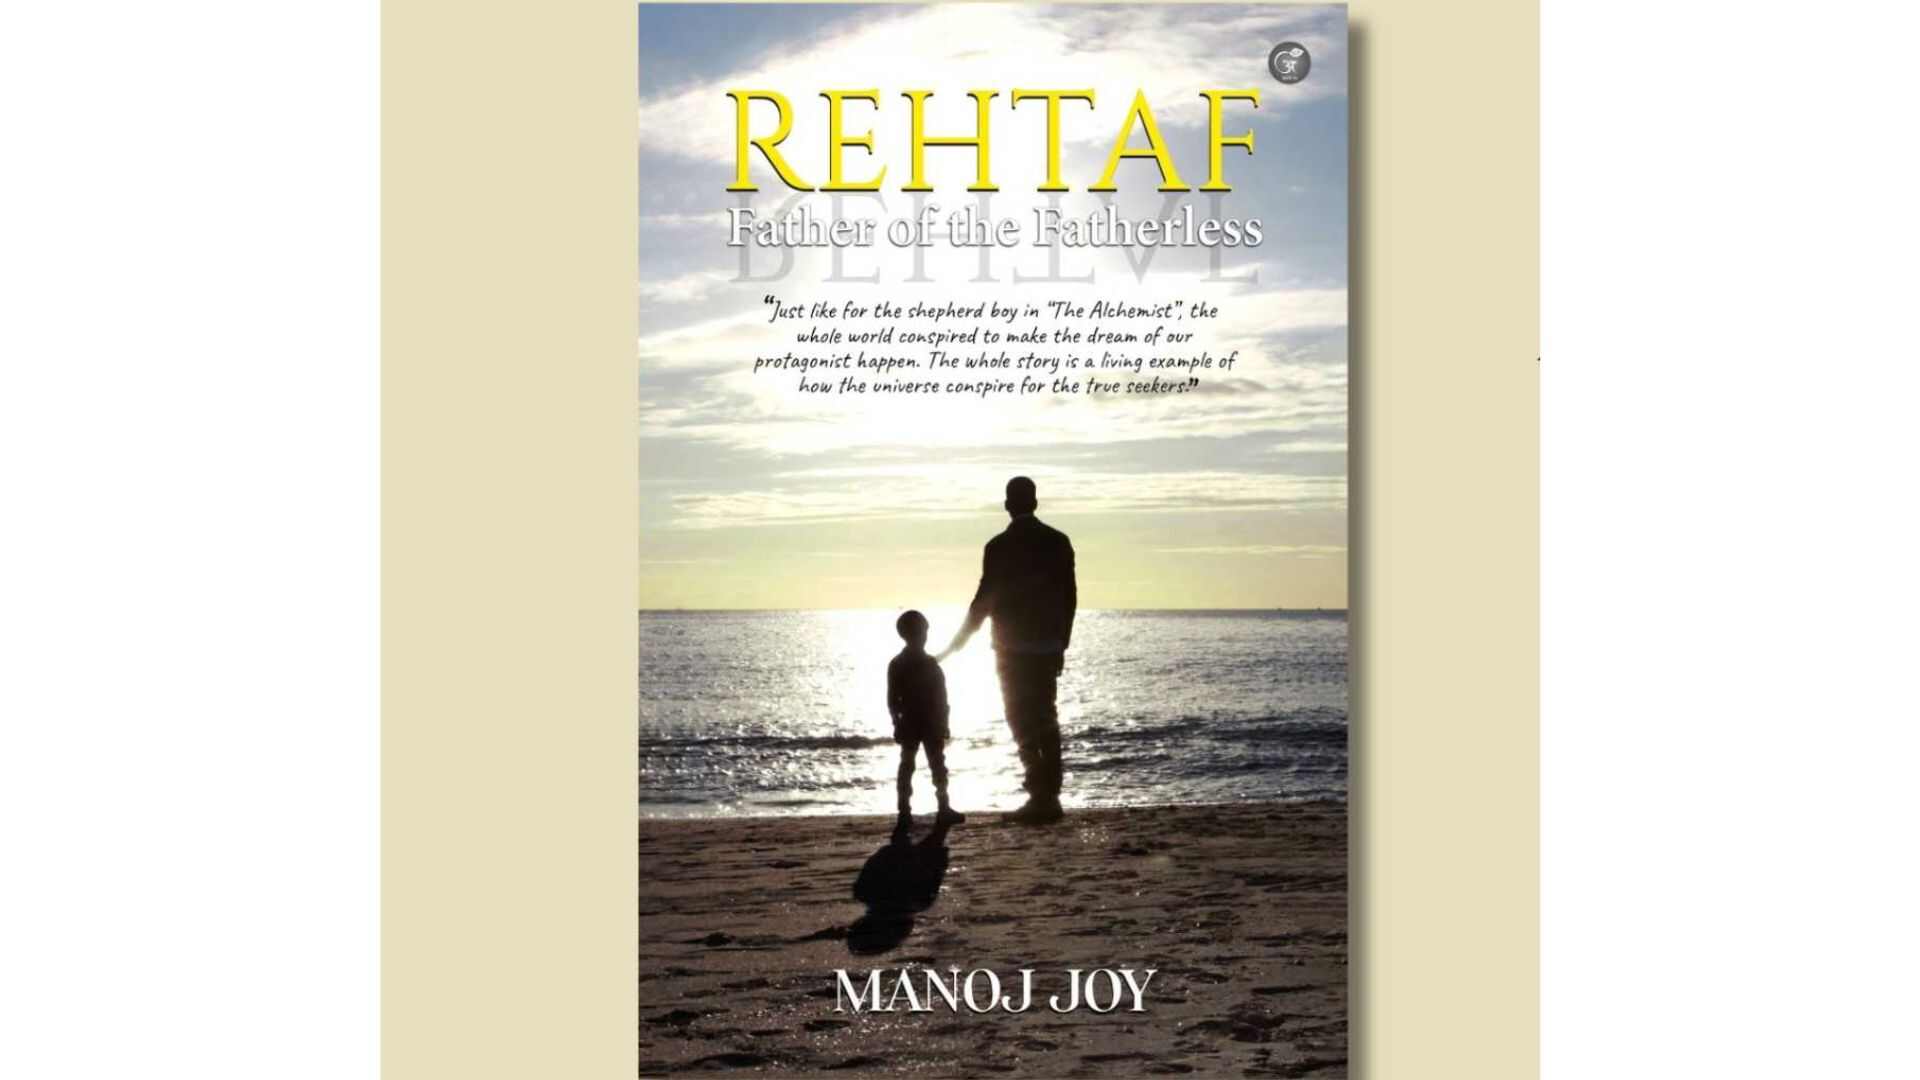 Manoj Joy’s ‘Rehtaf: Father Of The Fatherless’ Tops Bestseller List